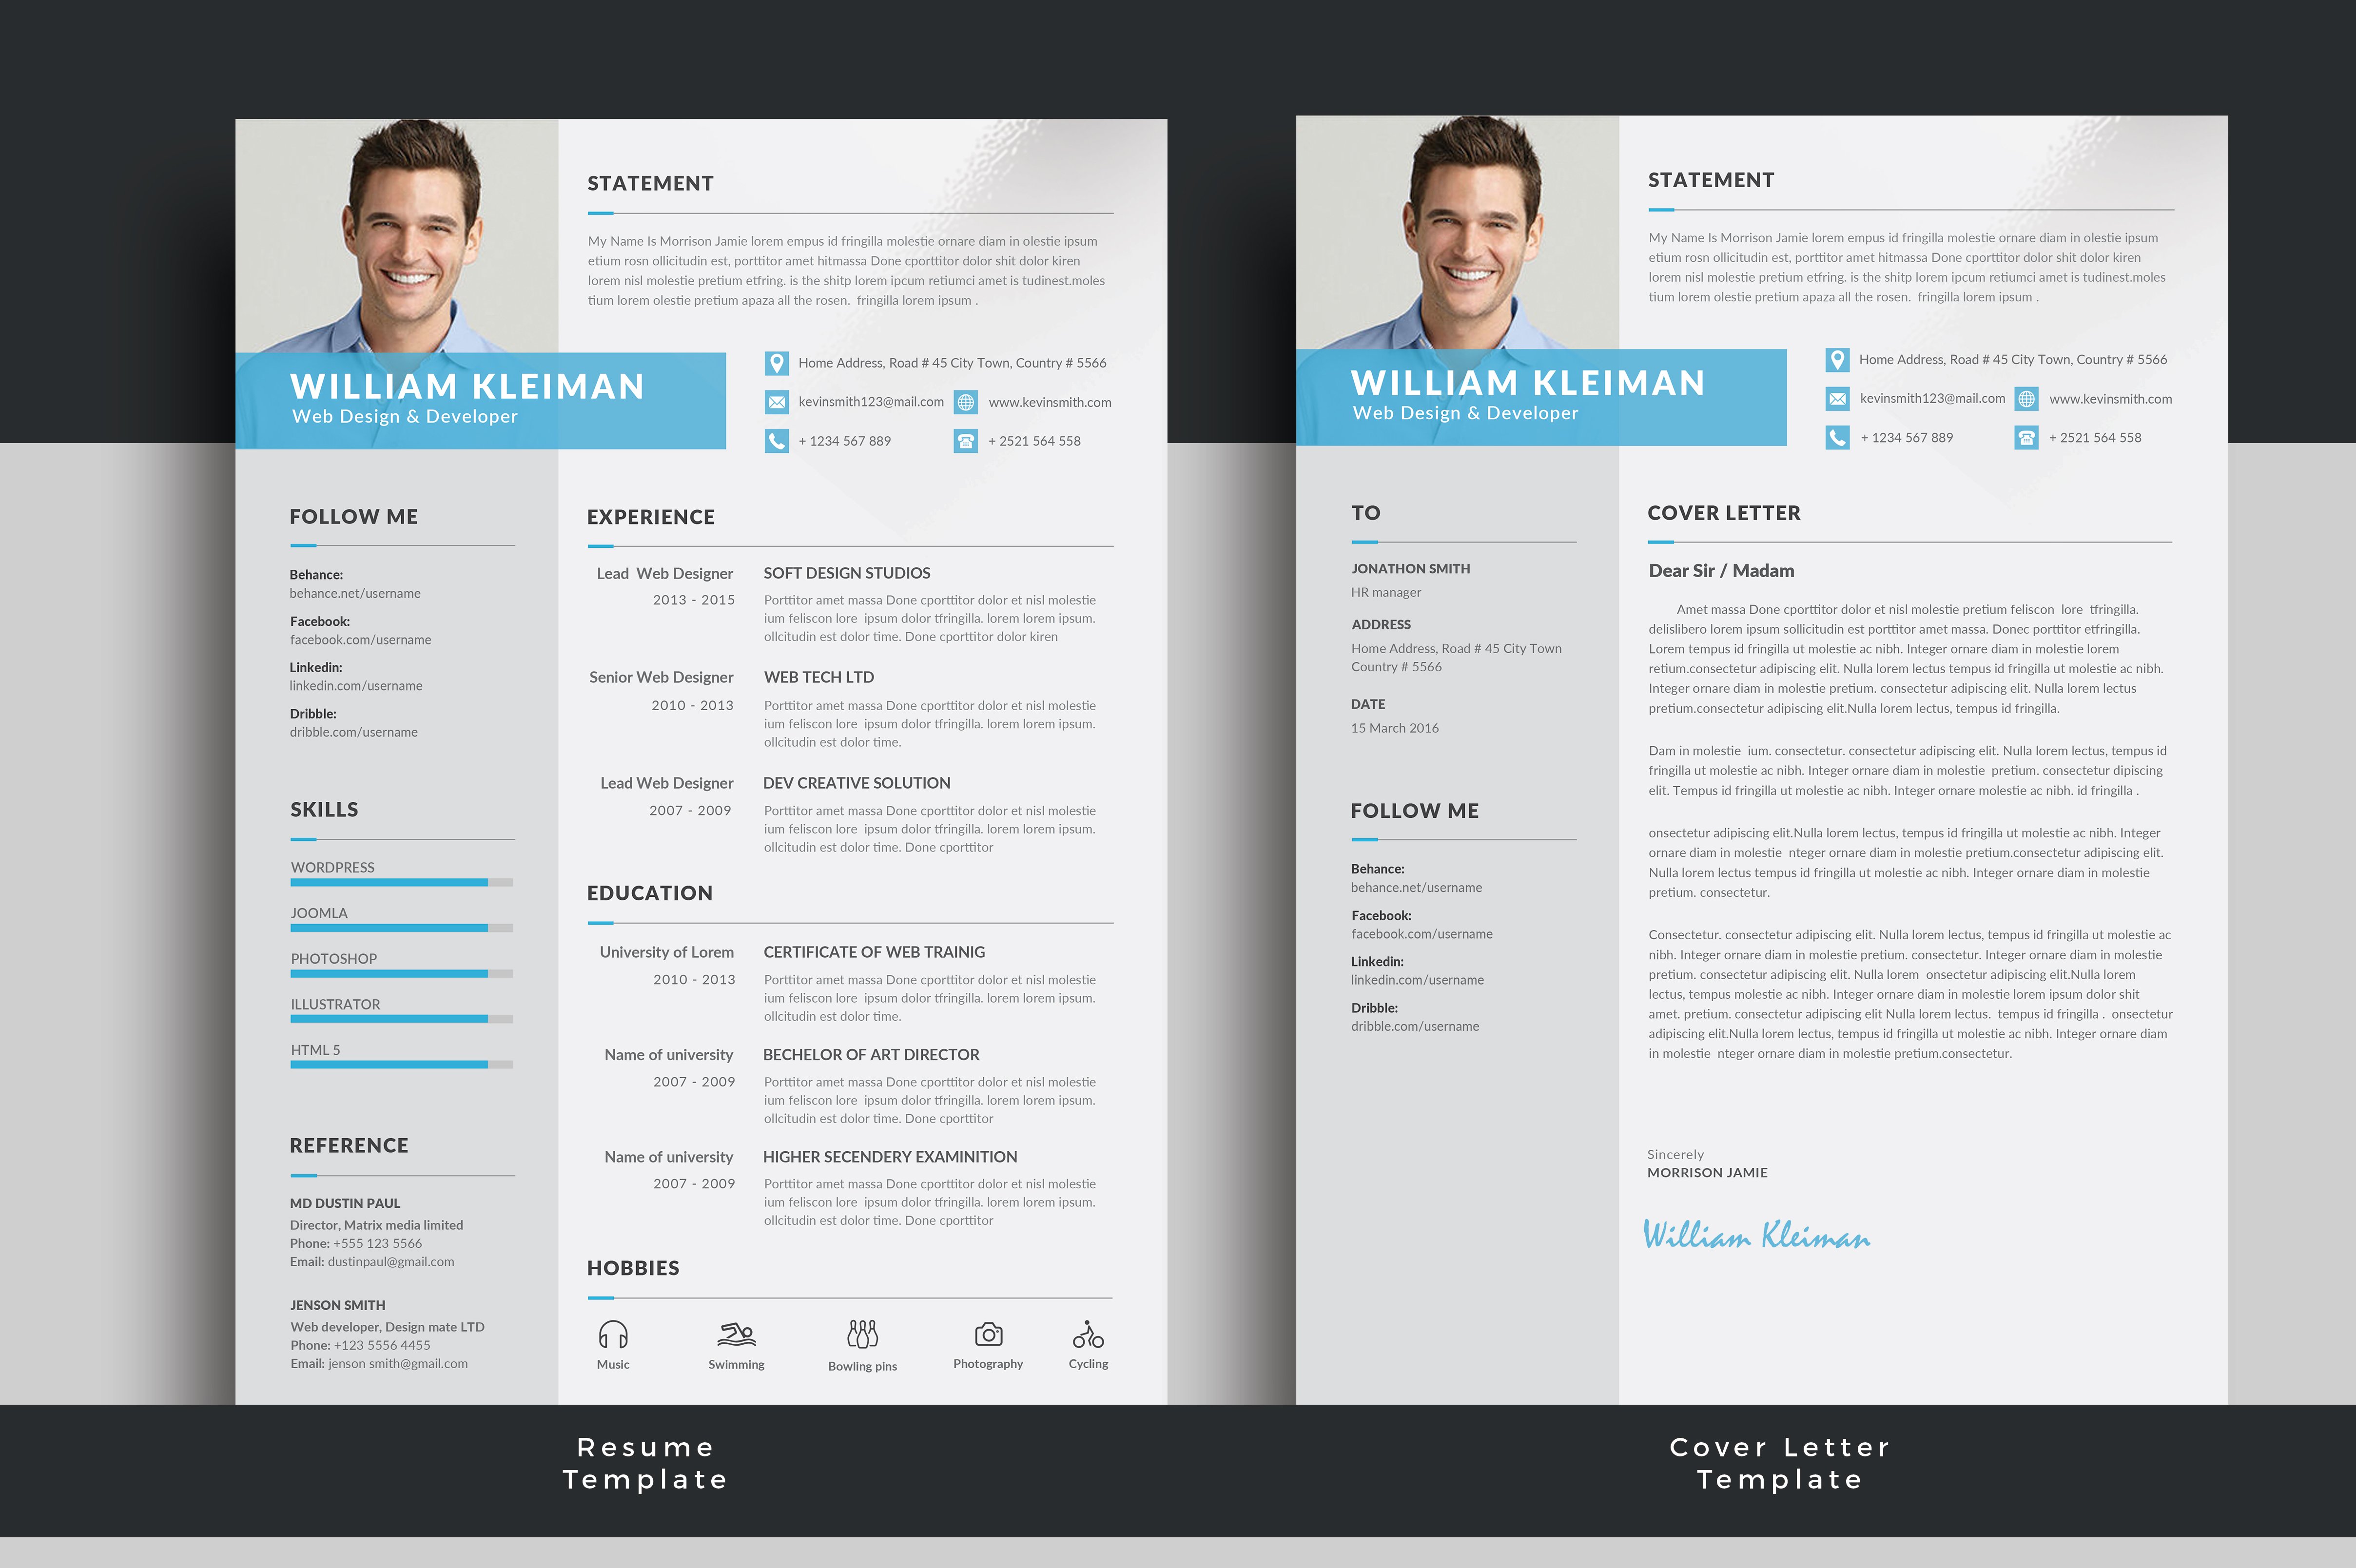 Two resume templates with blue accents.